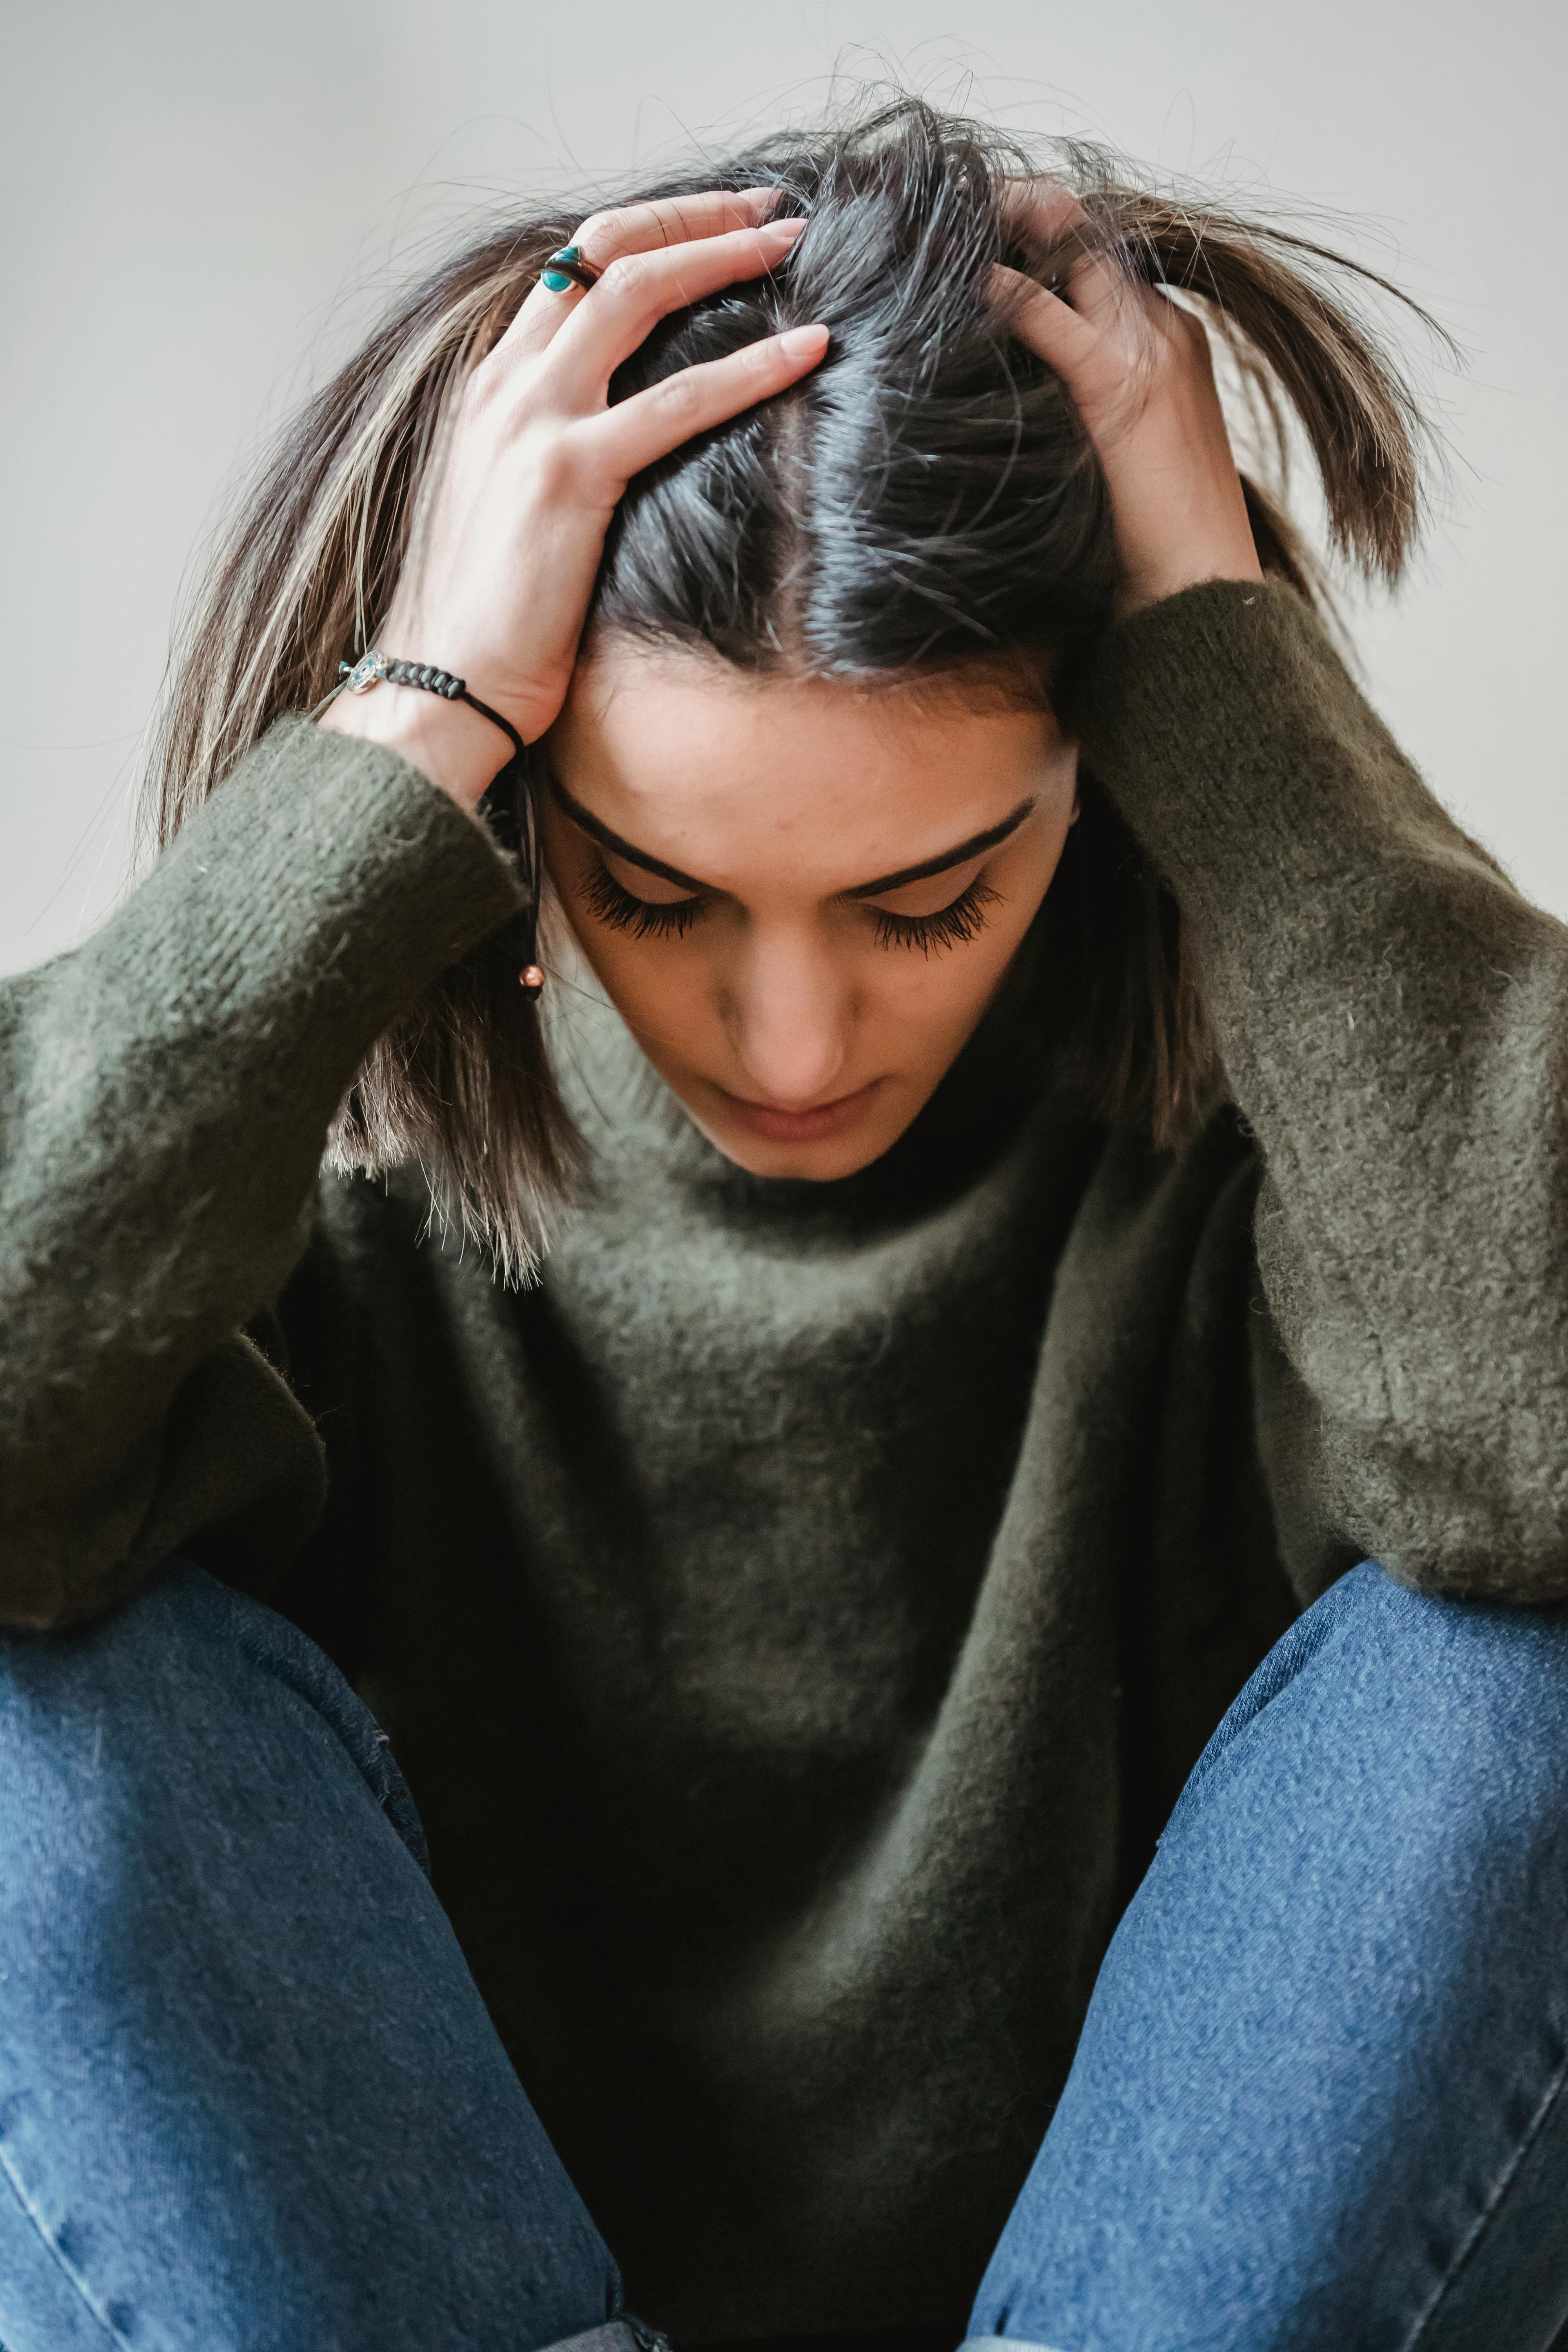 An upset woman looking down with her hands in her hair as she contemplates something | Source: Pexels